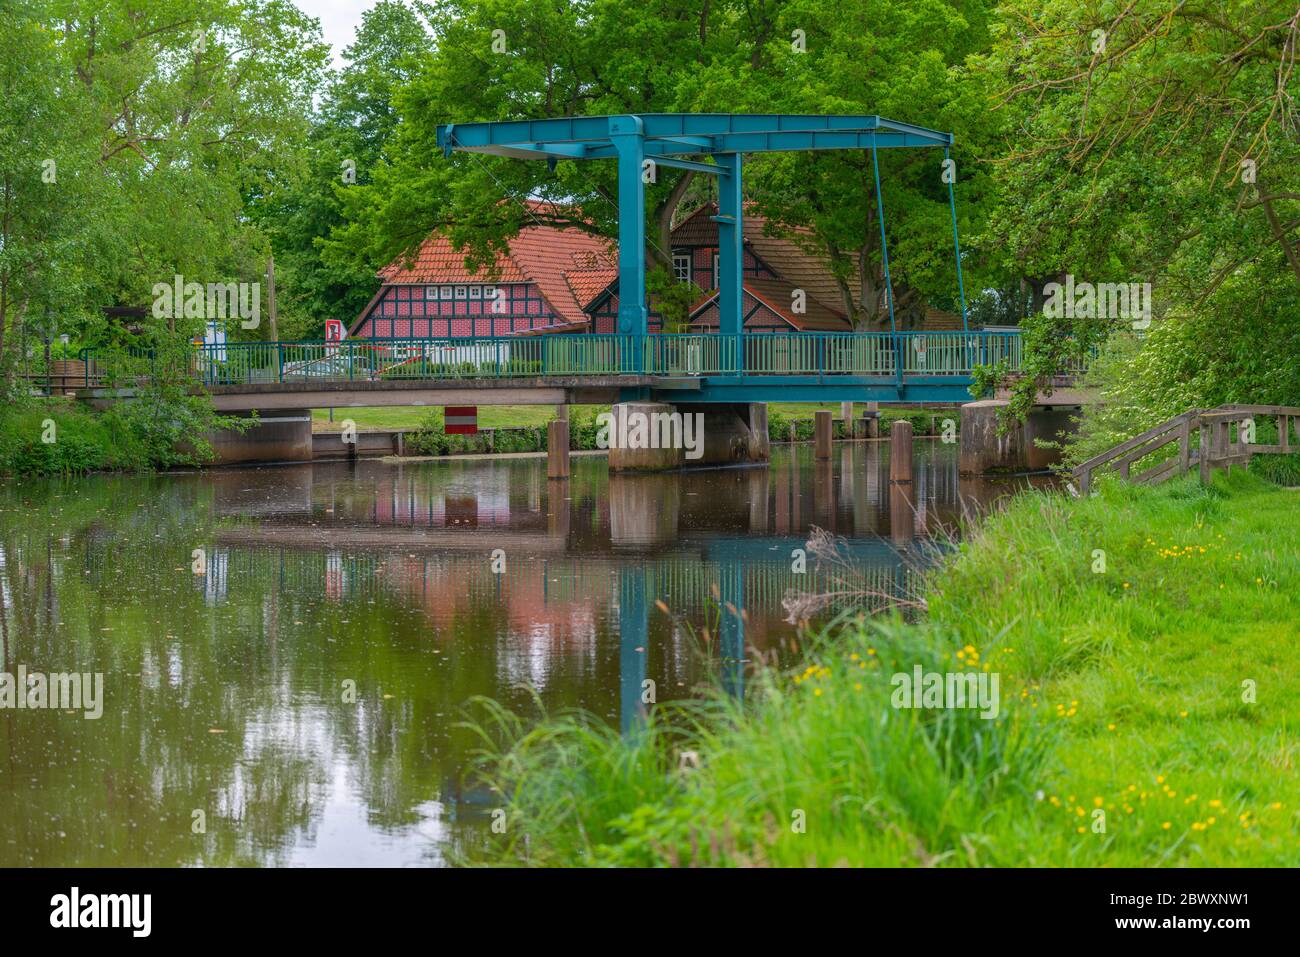 Restaurant, draw-bridge across the small river Hamme, village of Worpswede - Neu Helgoland, district Osterholz, Lower Saxony, Germany, Europe Stock Photo